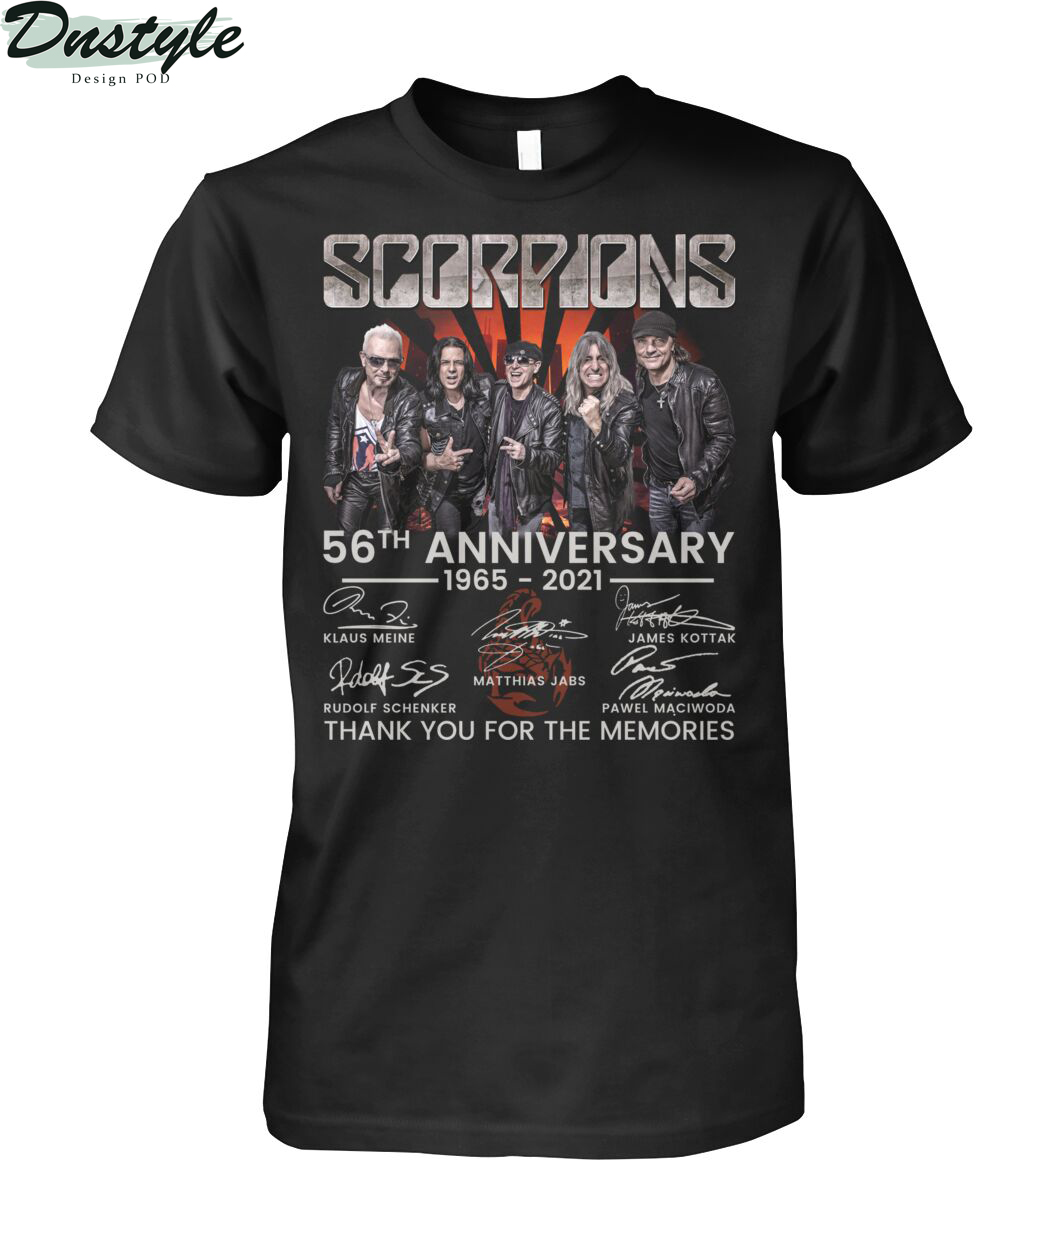 Scoprions 56th anniversary 1965 2021 thank you for the memories shirt